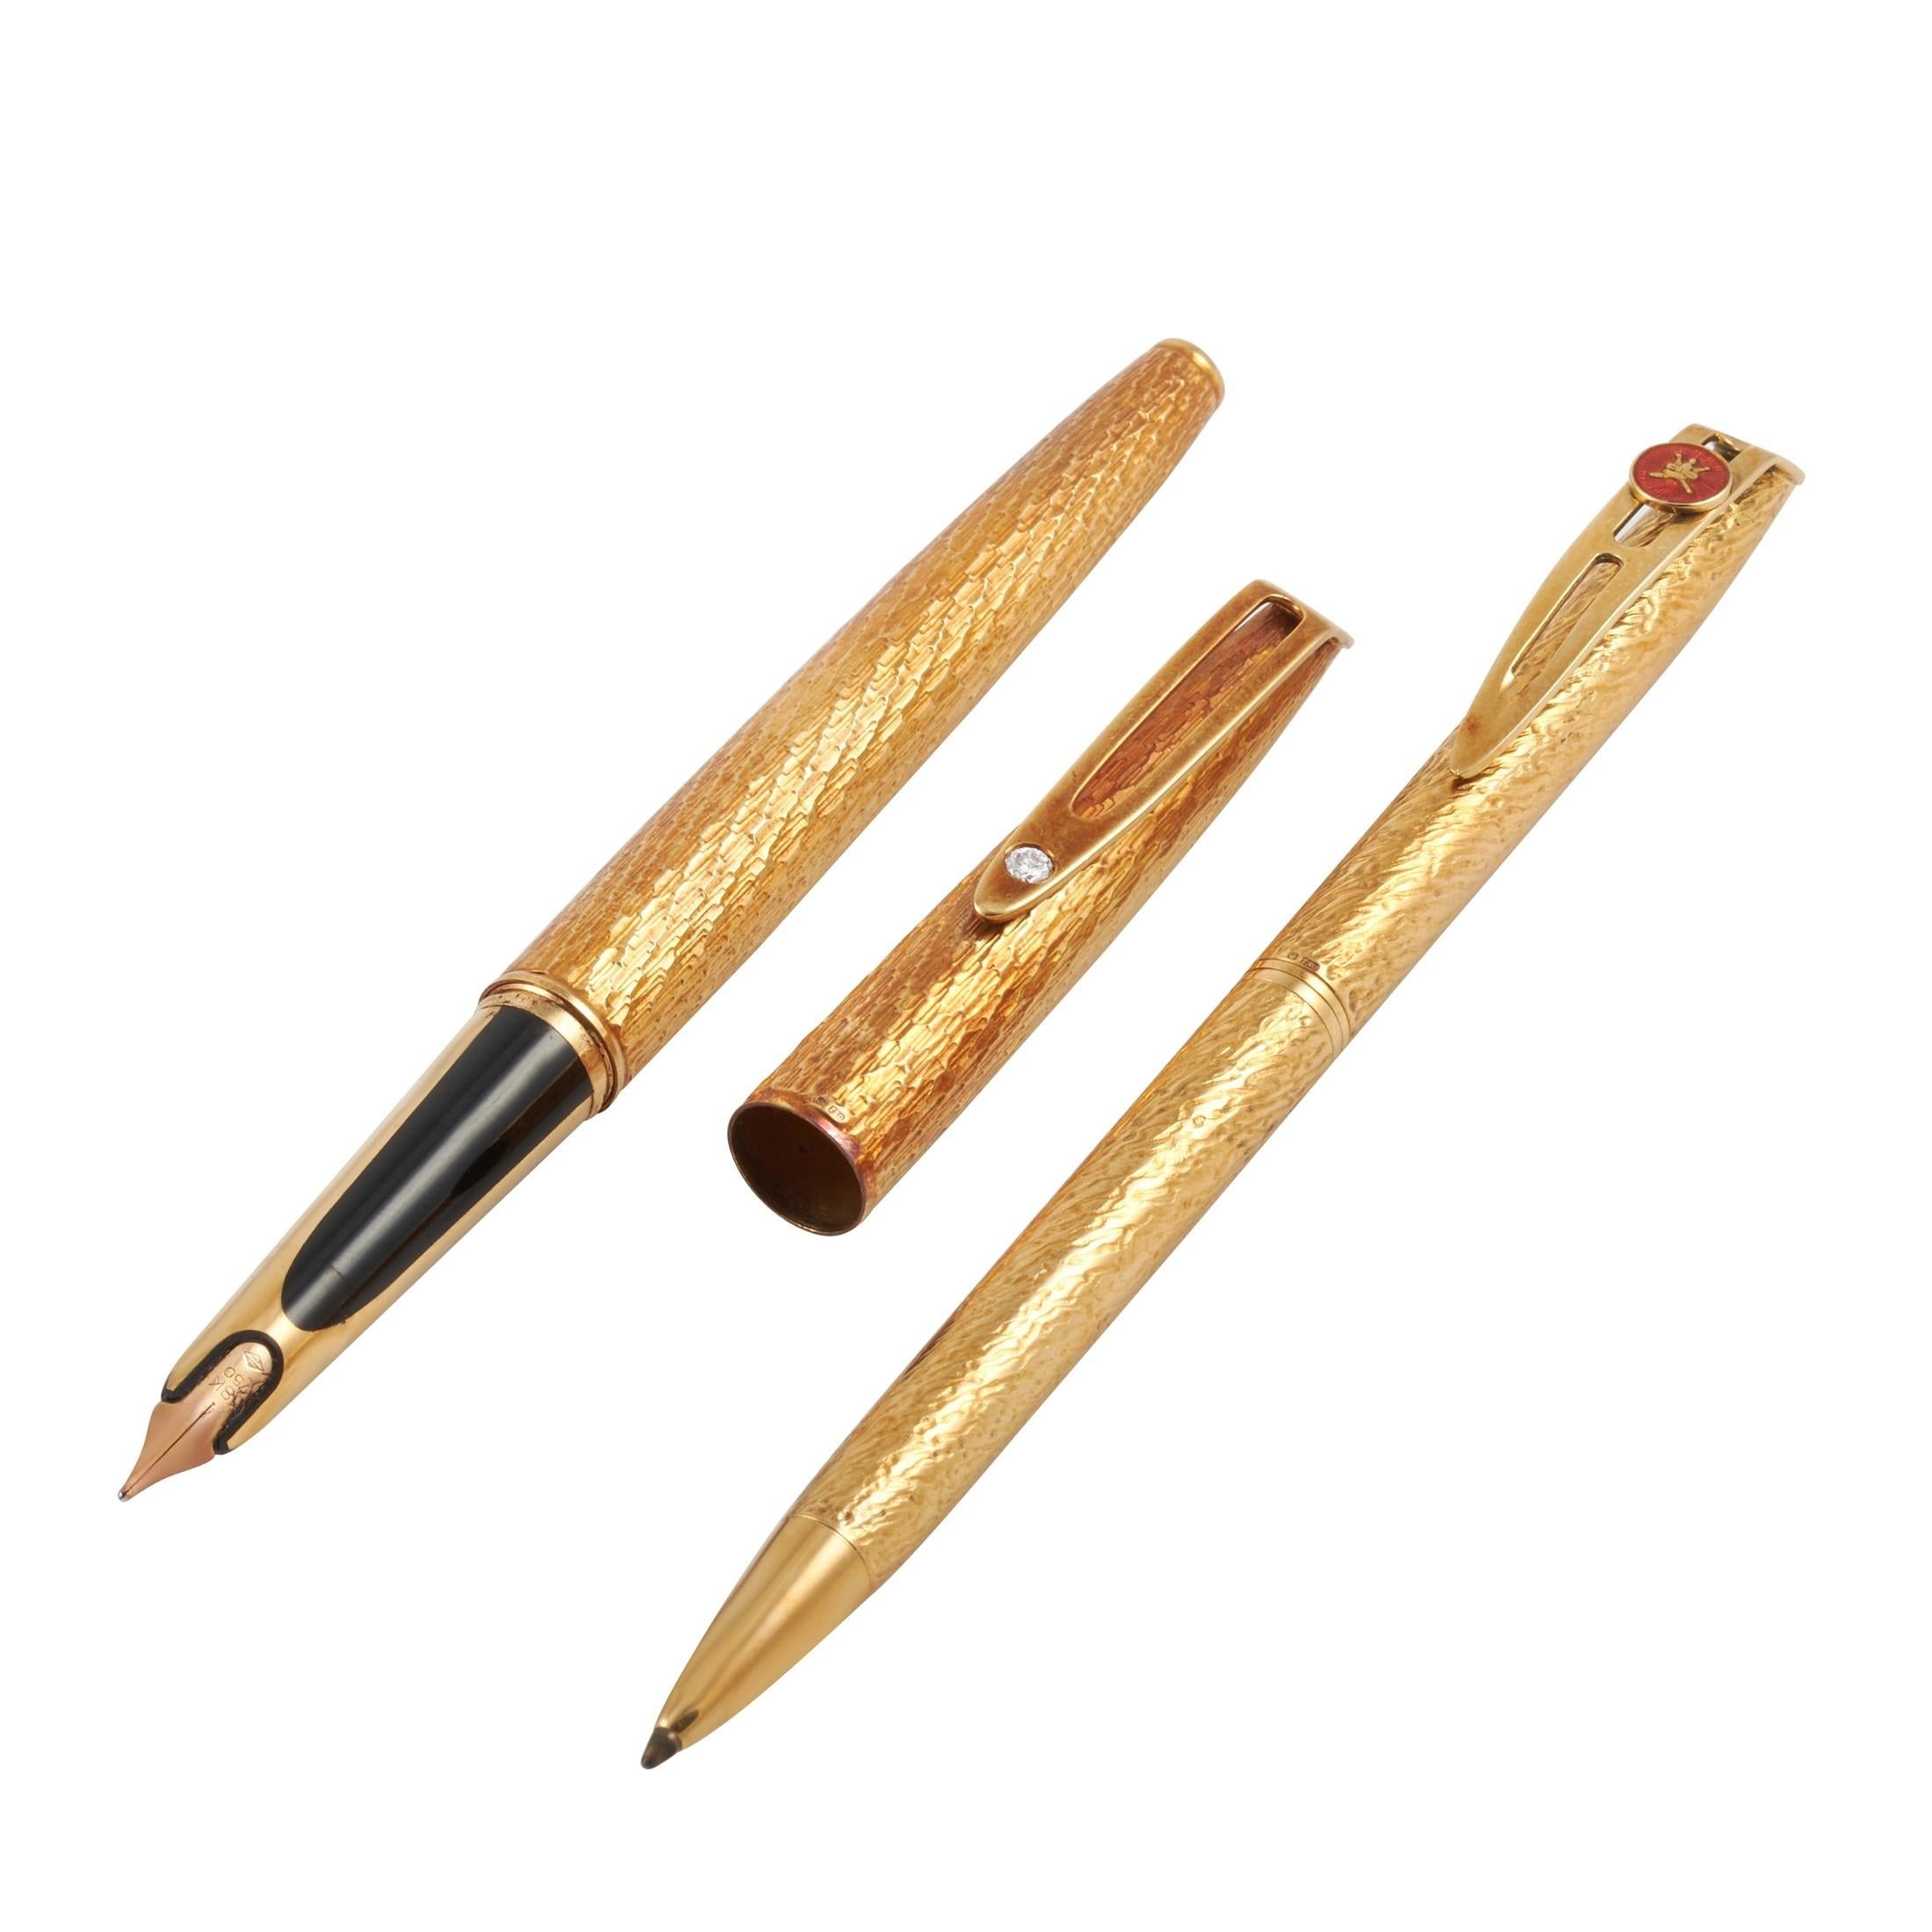 This set of two 18K textured yellow gold pens were made for the Sultan of Oman to give as gifts. One pen features a fountain tip, and the clip is set with a single round diamond. The other pen features a retractable ball point tip, and its cap bears